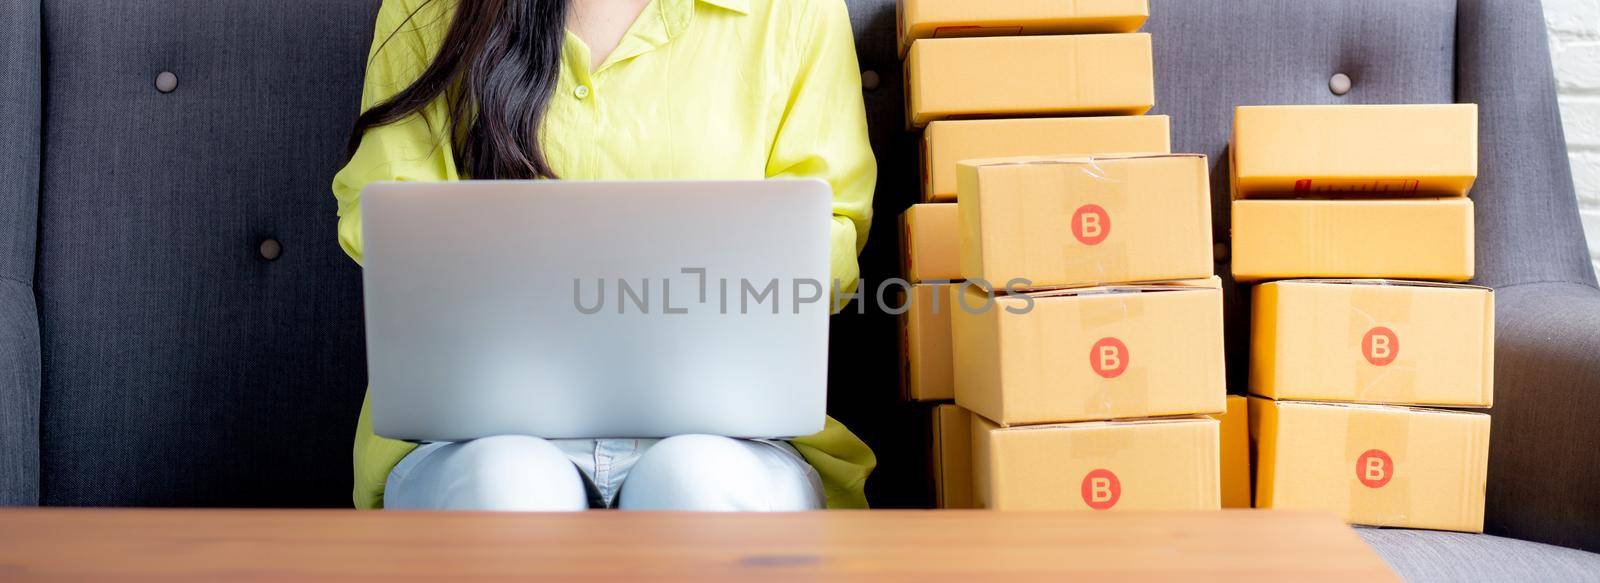 Young asian woman is merchant using laptop computer on sofa checking order of customer with purchase online shopping, business SME or startup, entrepreneur or seller and service delivery product. by nnudoo